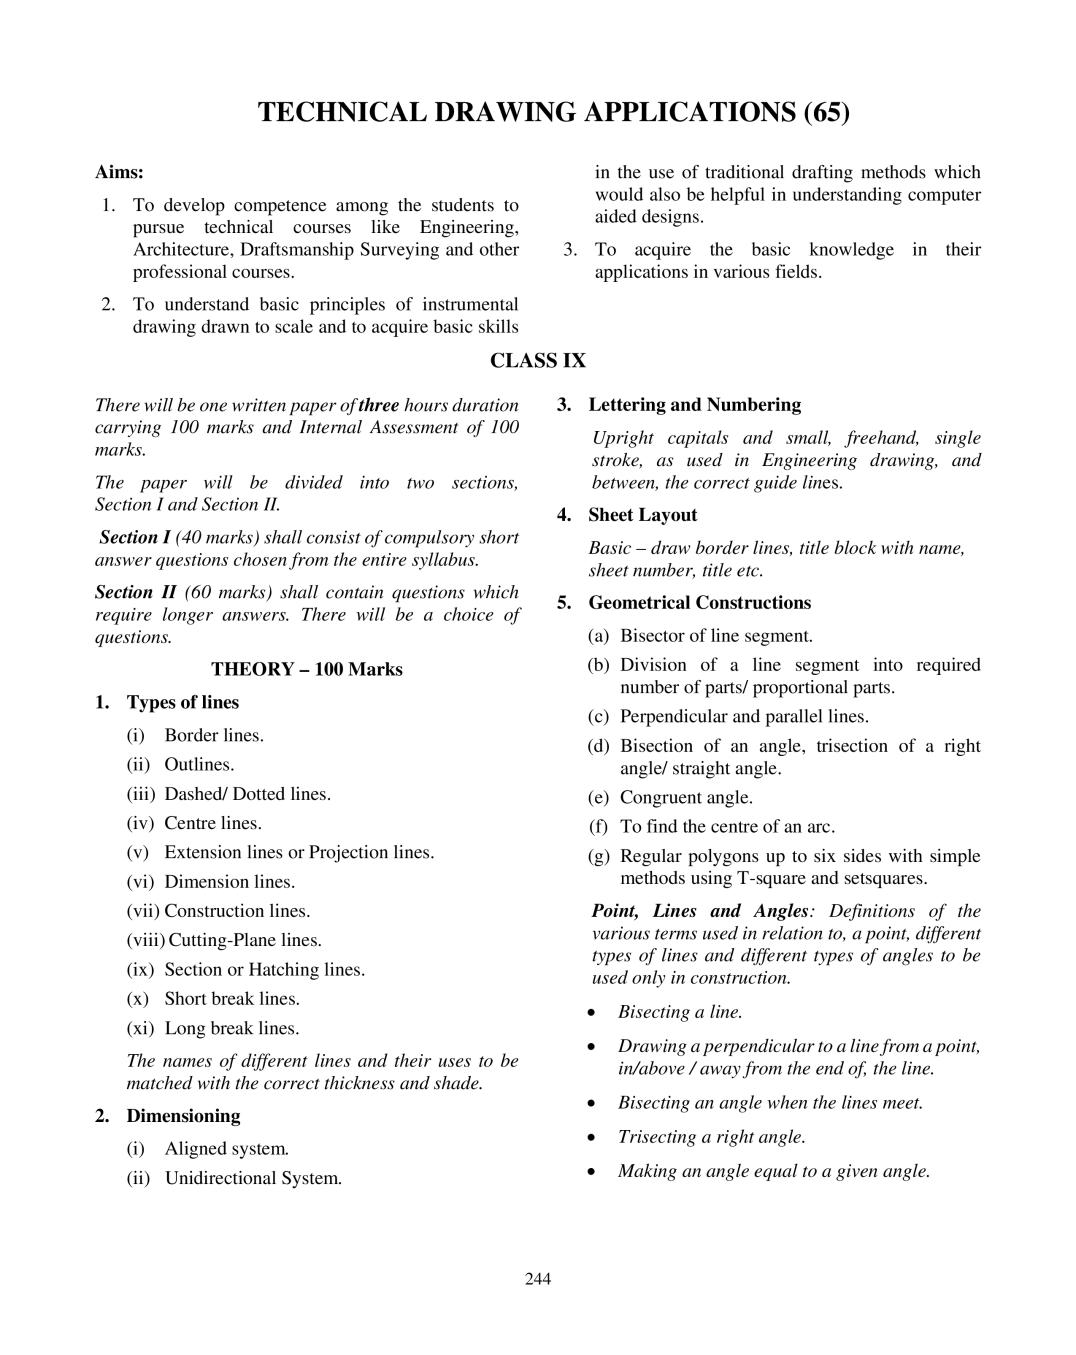 ICSE Class 10 Technical Drawing Applications Syllabus 2021 - Page 1